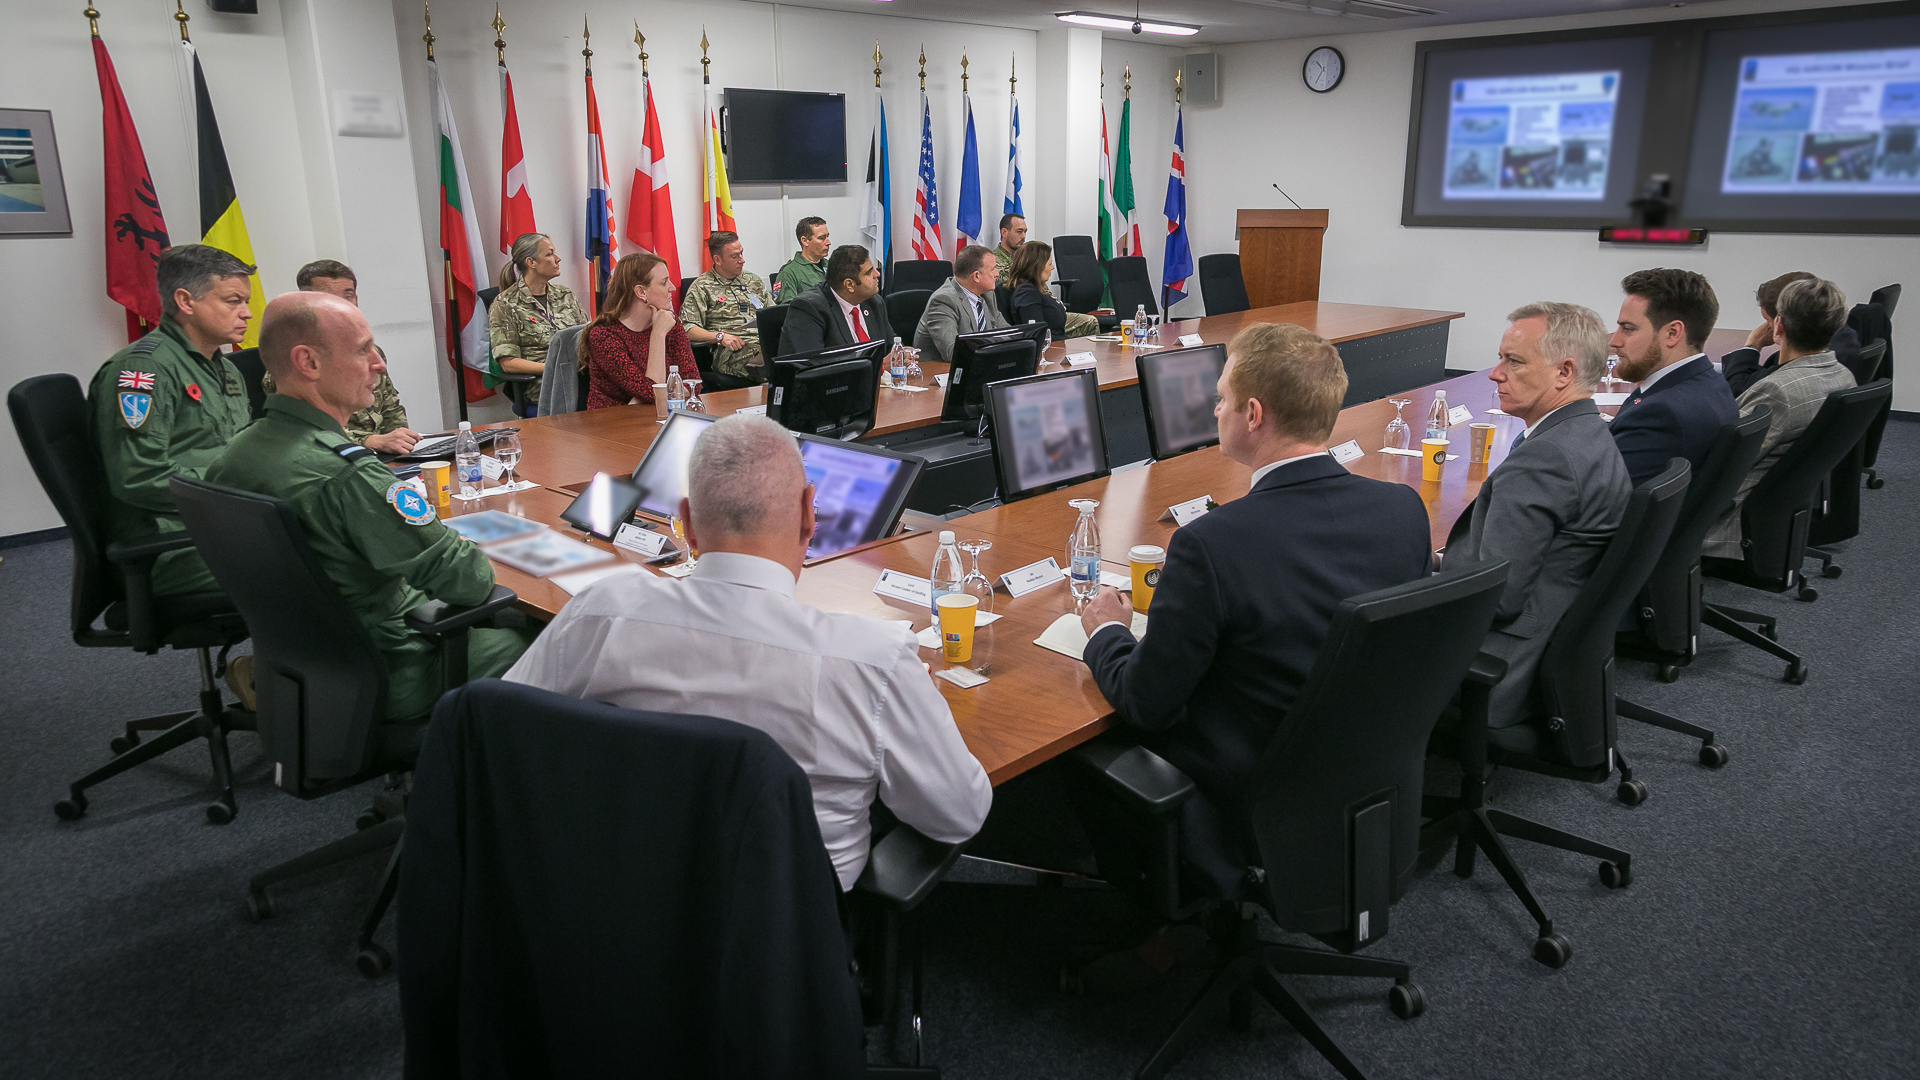 Personnel sit around conference table with flags, computers, and presentation board.